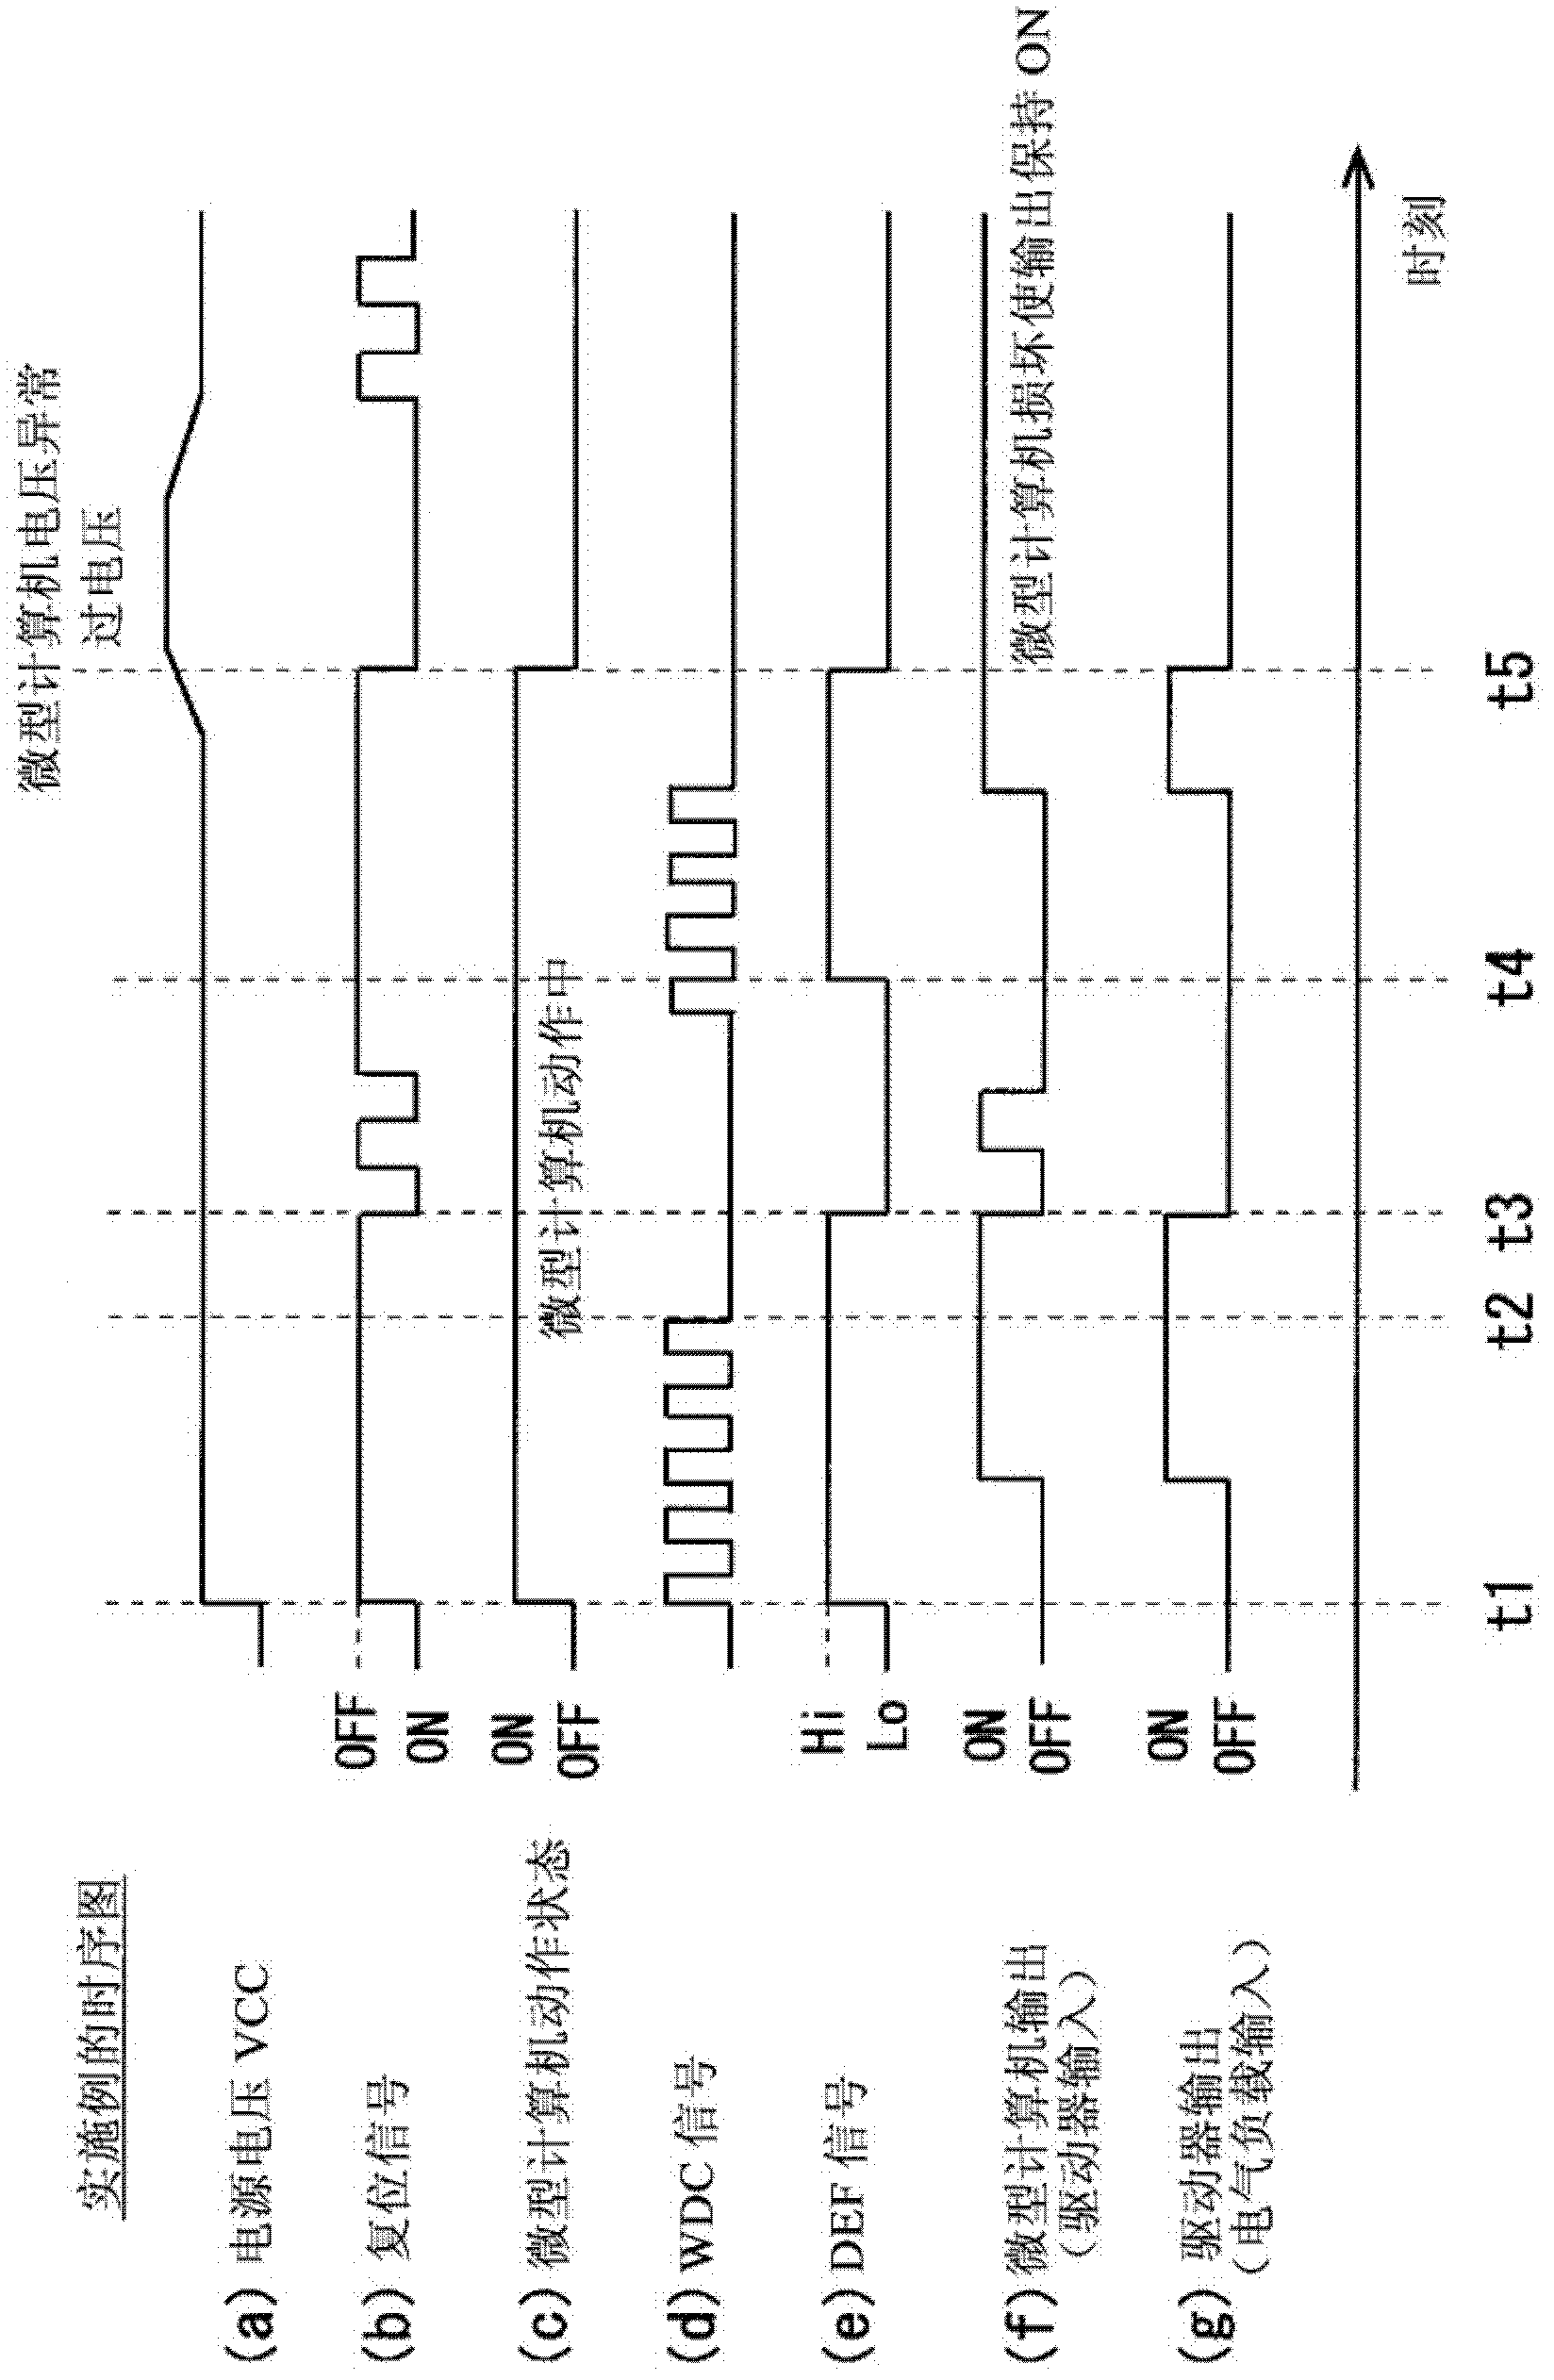 Microcomputer monitoring device, electronic control device and method for monitoring microcomputer